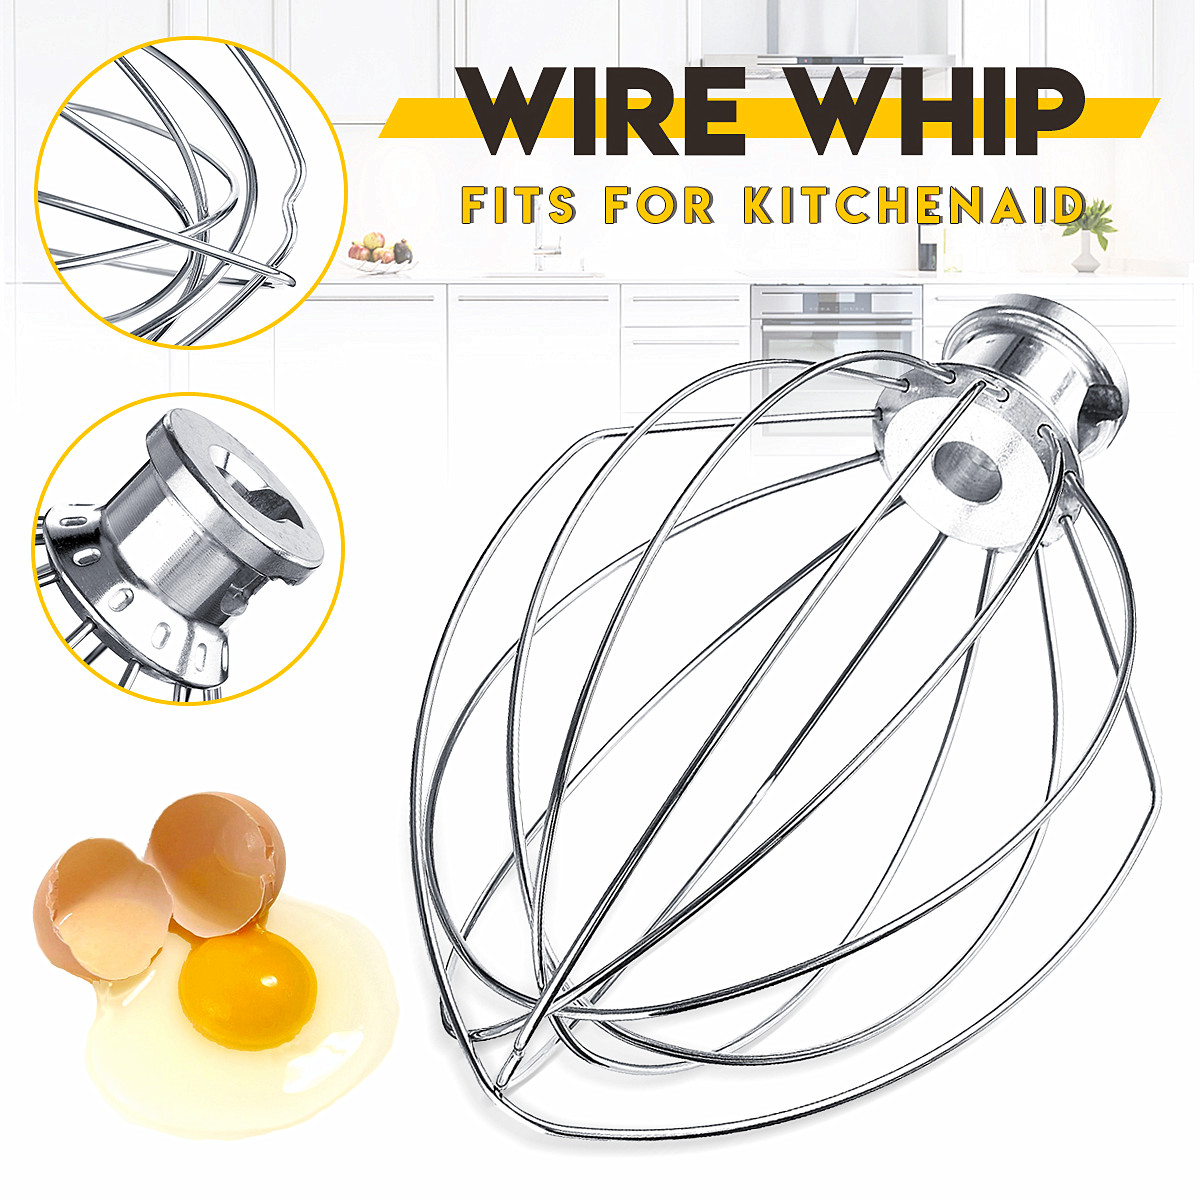 6-Wire-Whip-Whisk-Beater-Mixer-Stainless-Steel-Silver-For-KitchenAid-K5AWW-KSM90-1731695-2